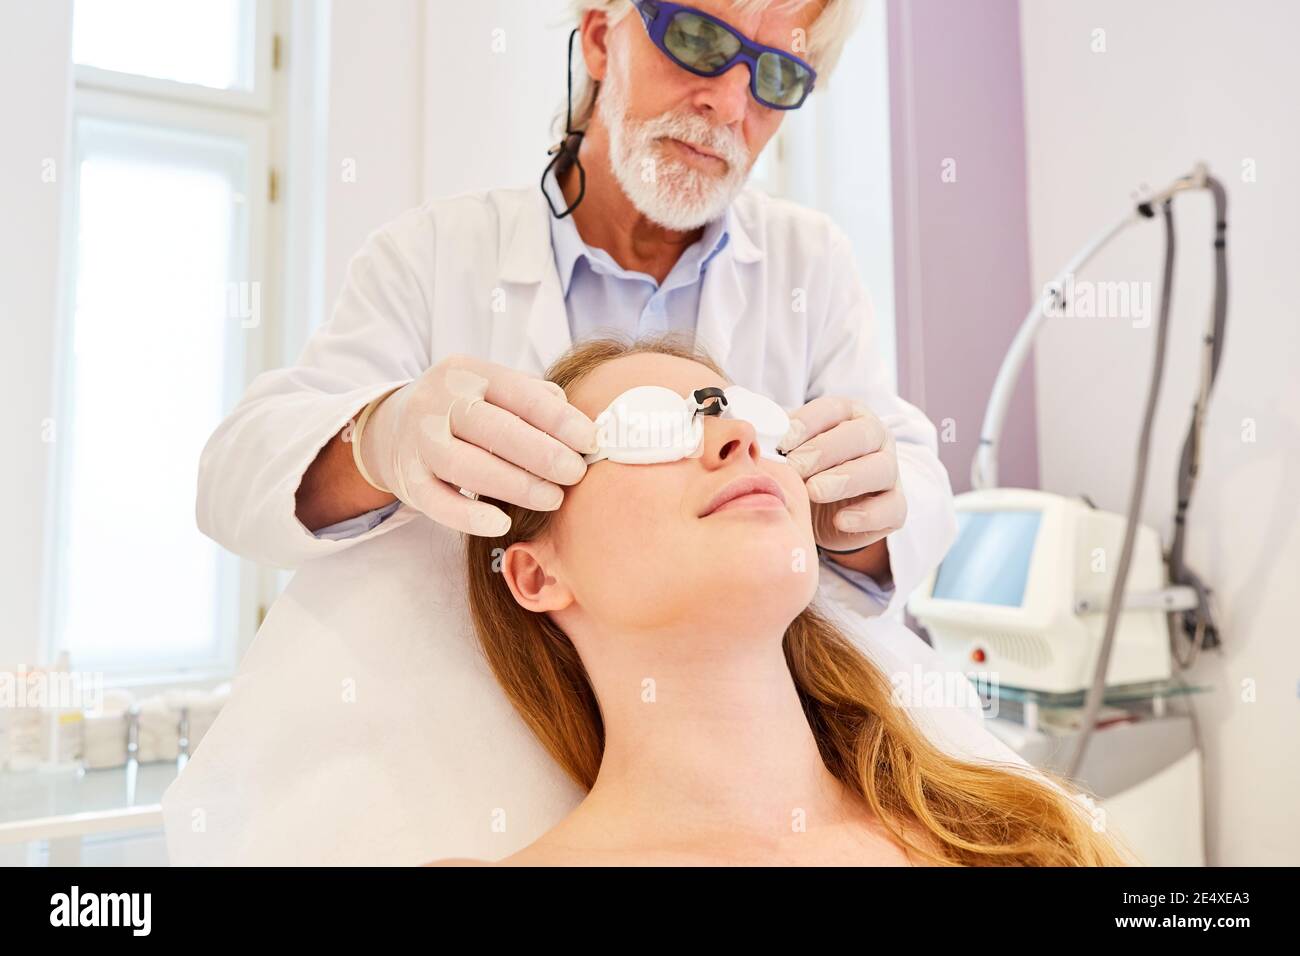 Dermatologist checks protective goggles on patient before laser treatment for skin rejuvenation Stock Photo